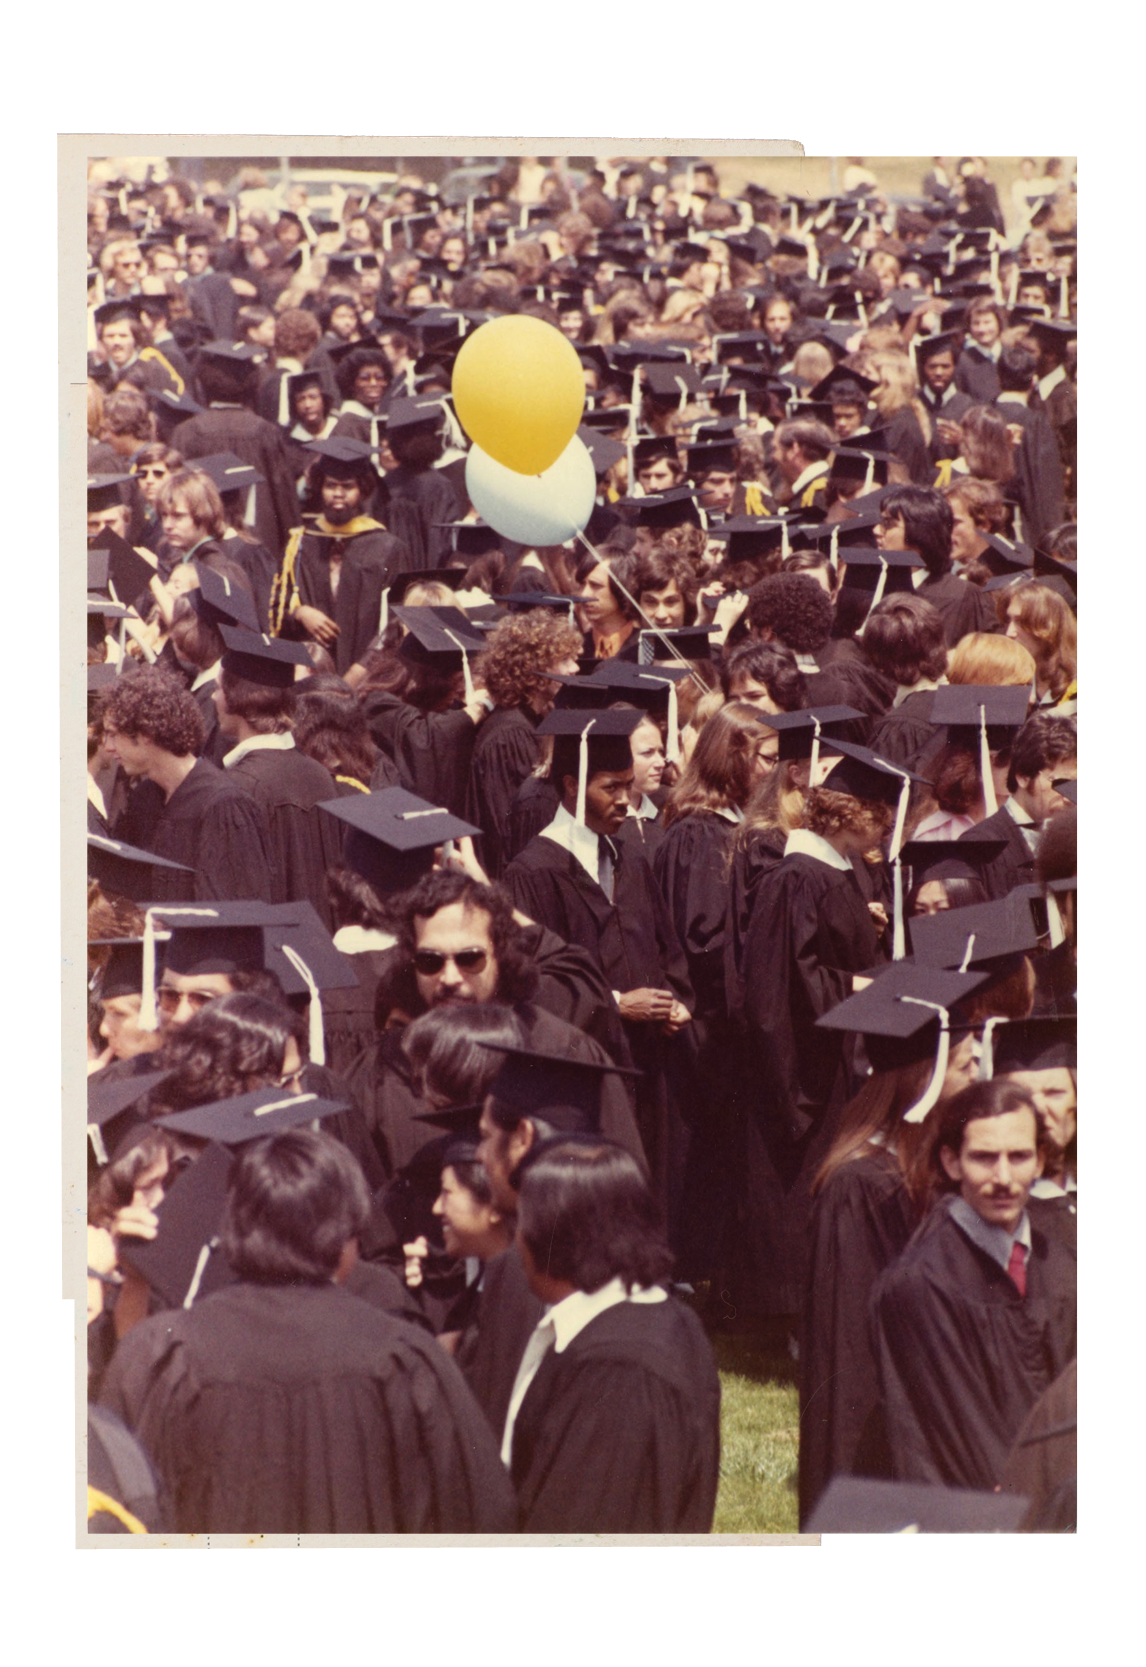 Students from the 1975 UCLA College graduation ceremony dressed in caps and gowns, with a white and yellow balloon floating overheard.